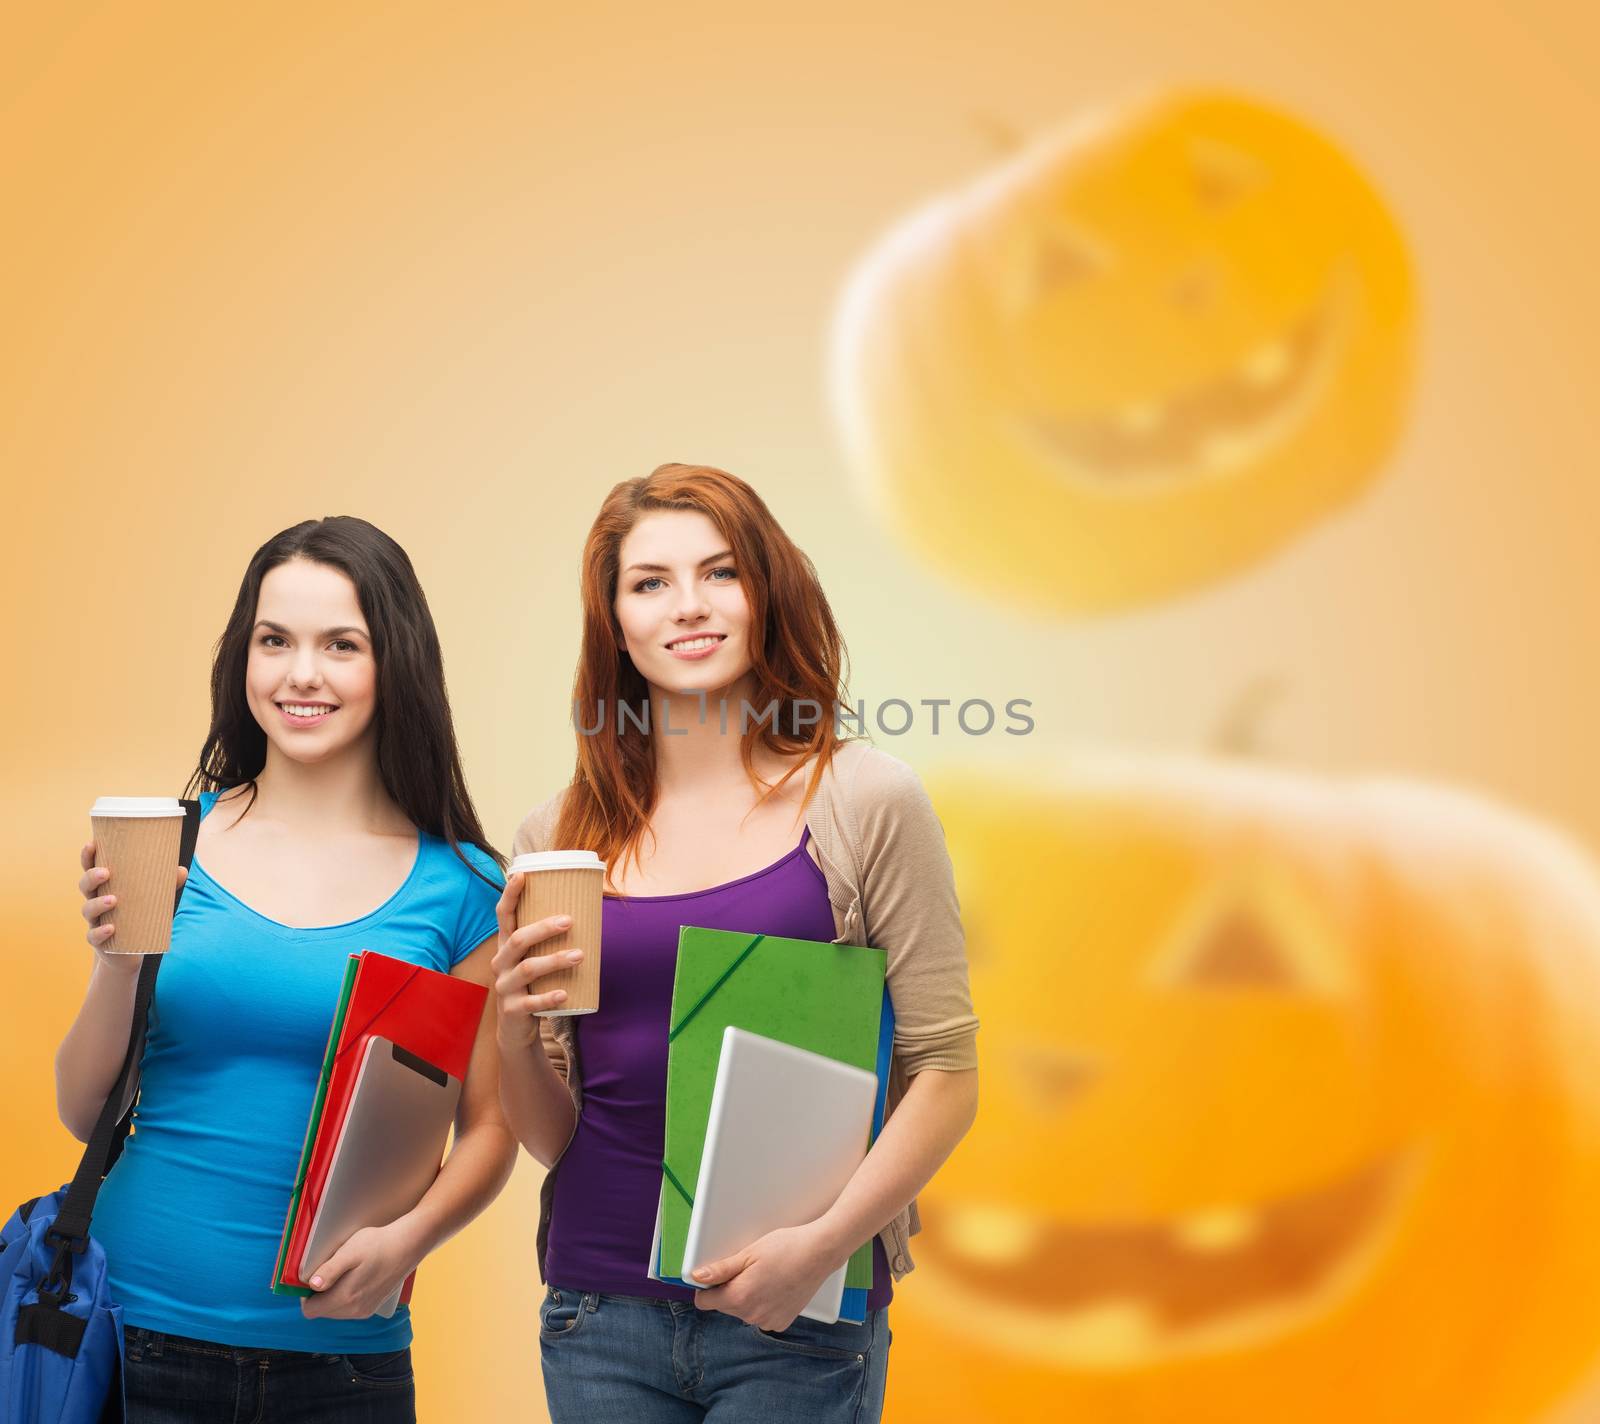 education, holidays, friendship, drinks and people concept - smiling student girls with books and paper coffe cups over halloween pumpkins background